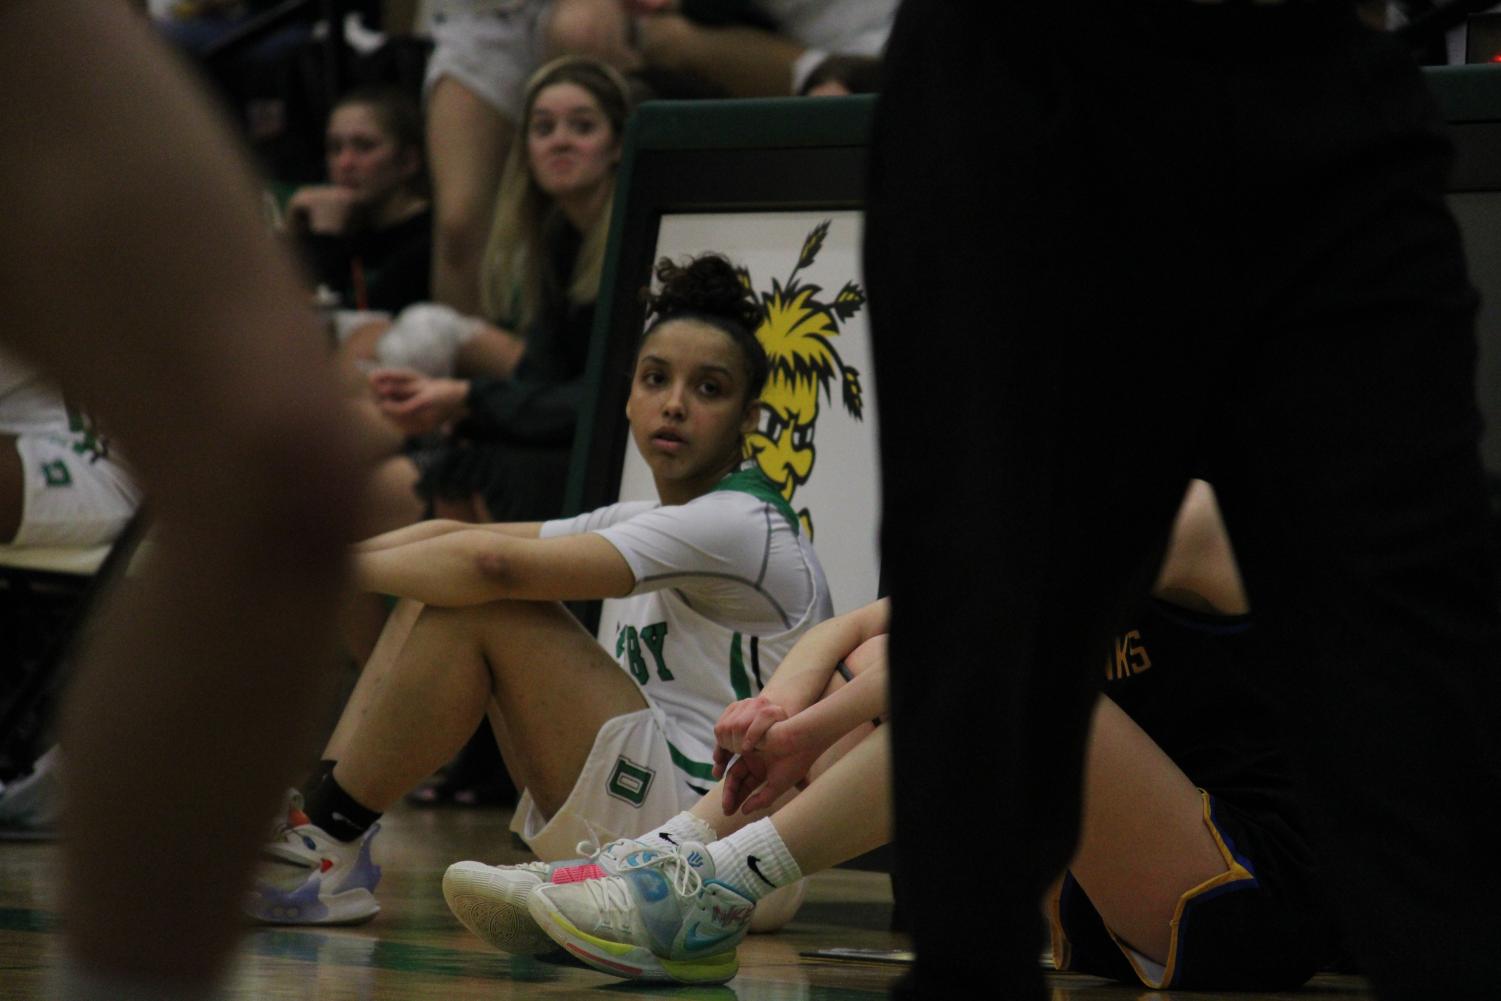 2%2F25%2F22+girls+basketball+game+vs+Hutchinson+%28Photos+by+Laurisa+Rooney%29